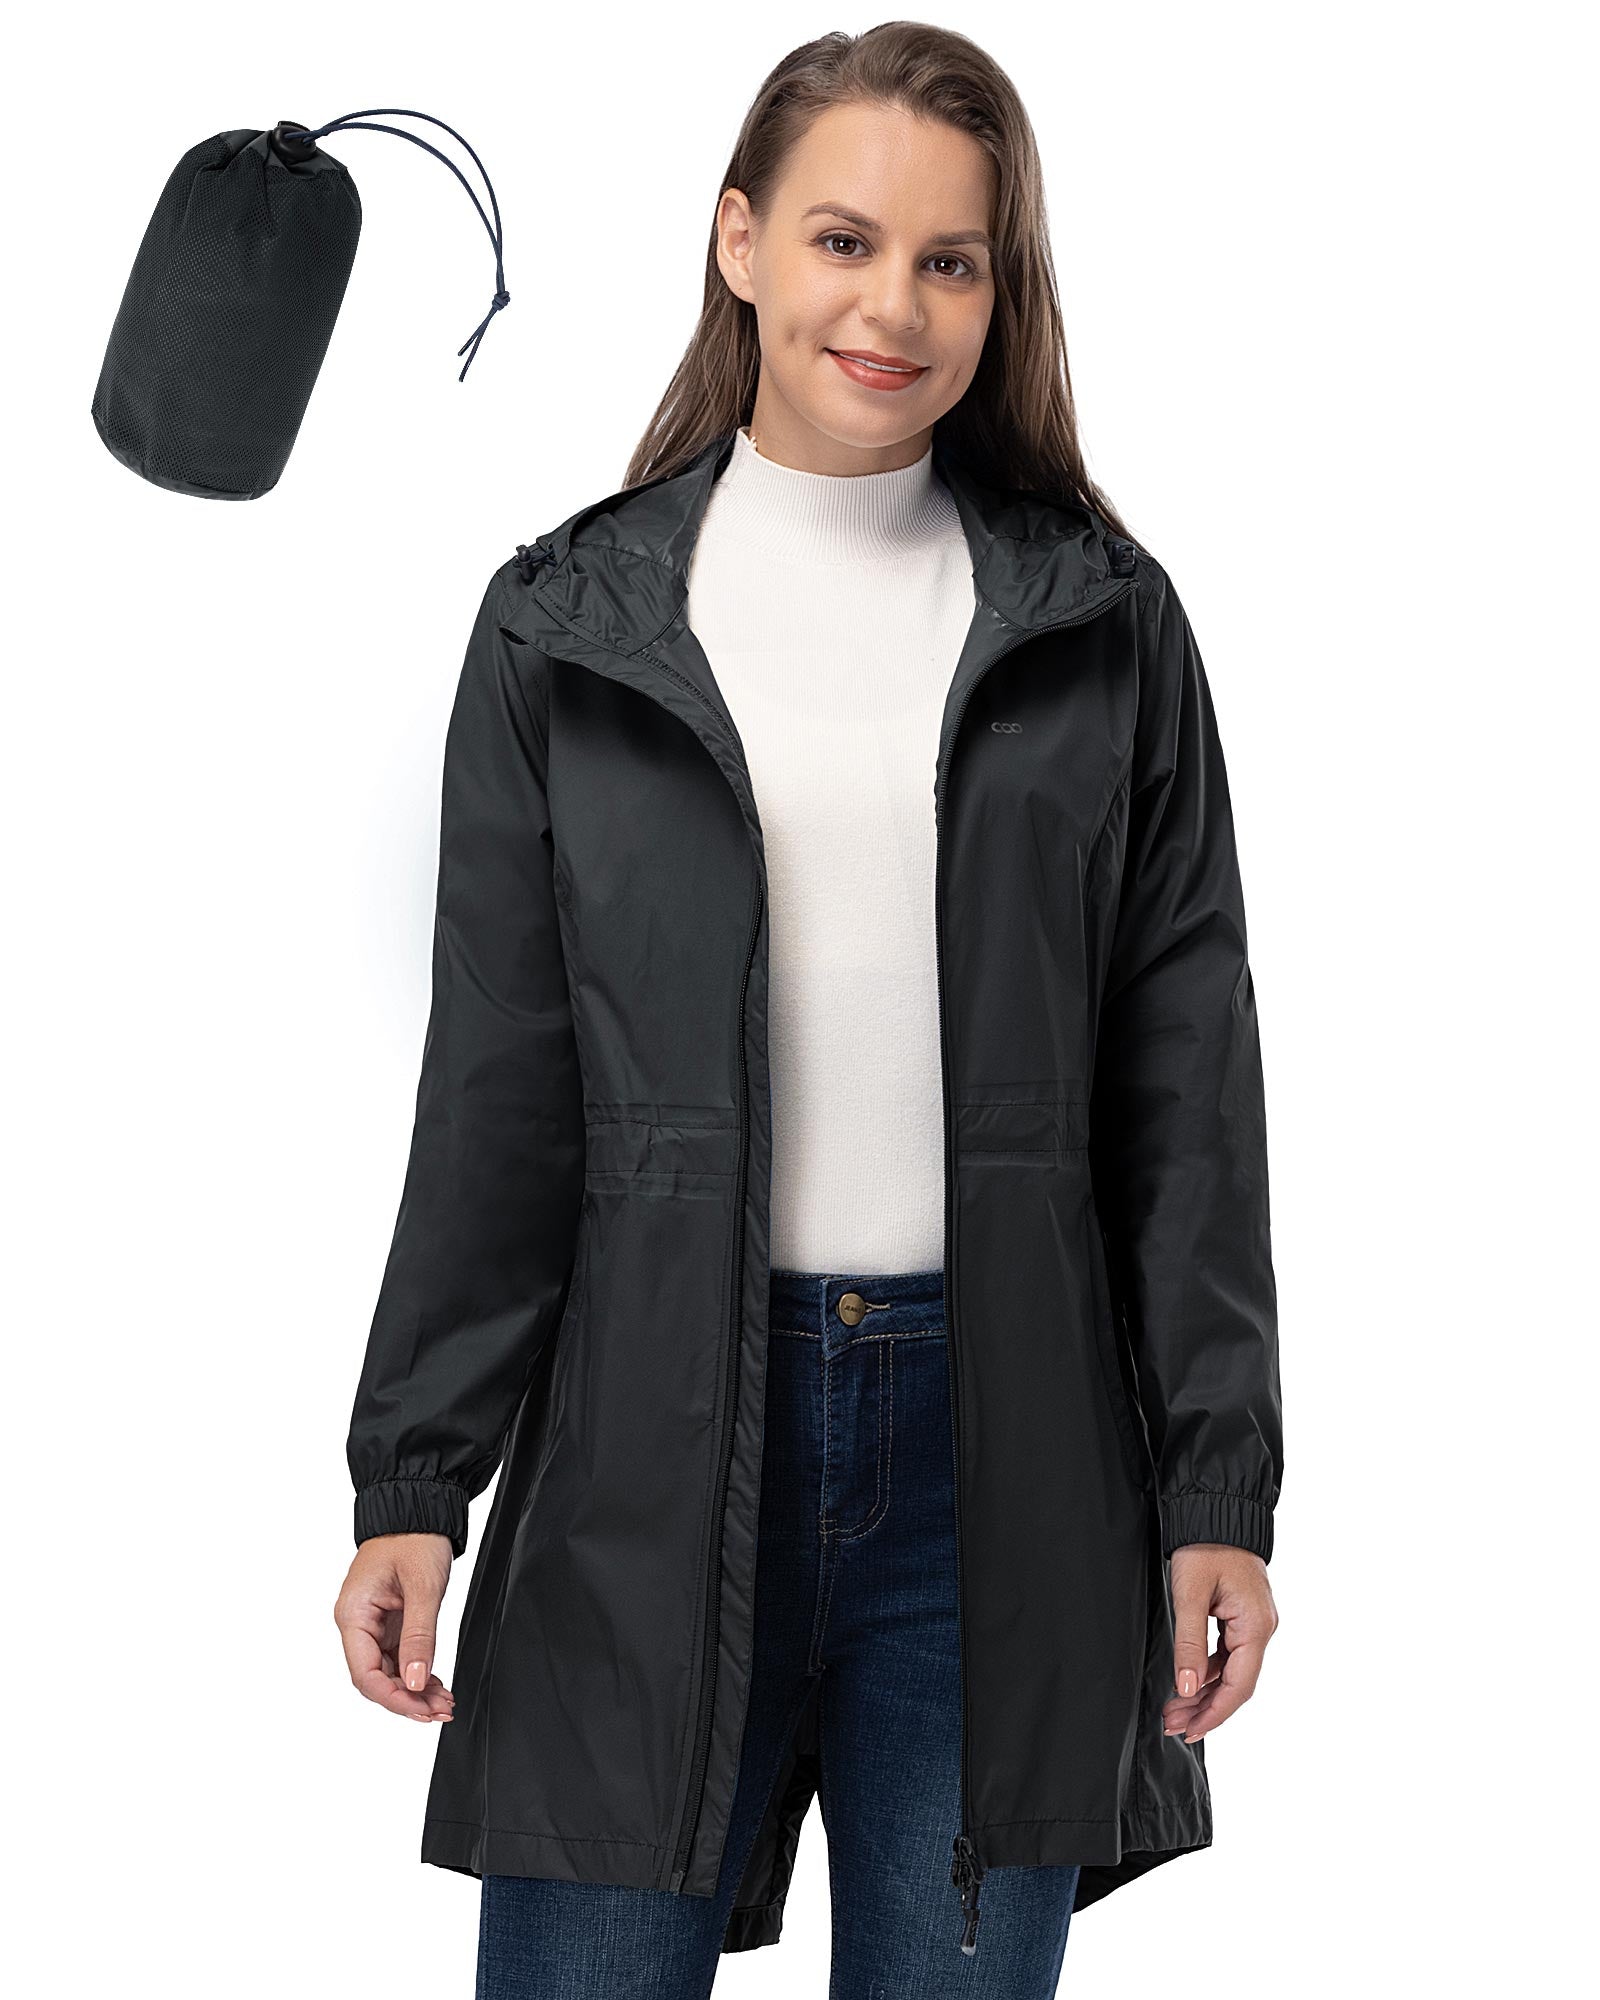 Women's Packable Long Rain Jacket with 2 Pockets: 0.55 lbs 3000mm W/P –  33,000ft